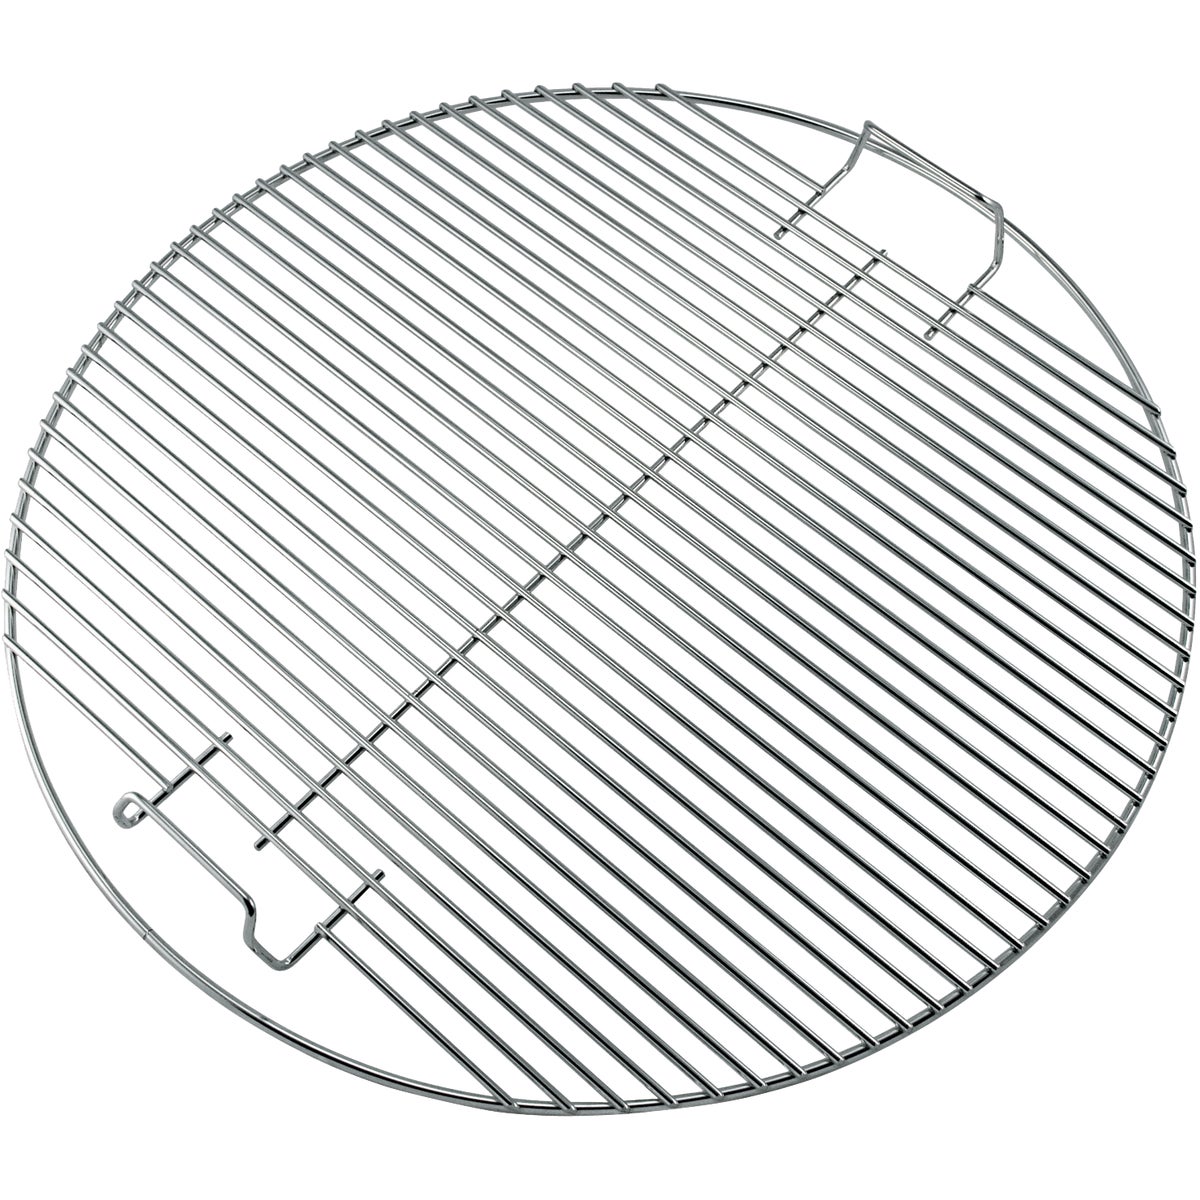 Weber 22.5 In. Dia. Nickel-Plated Steel Kettle Grill Grate